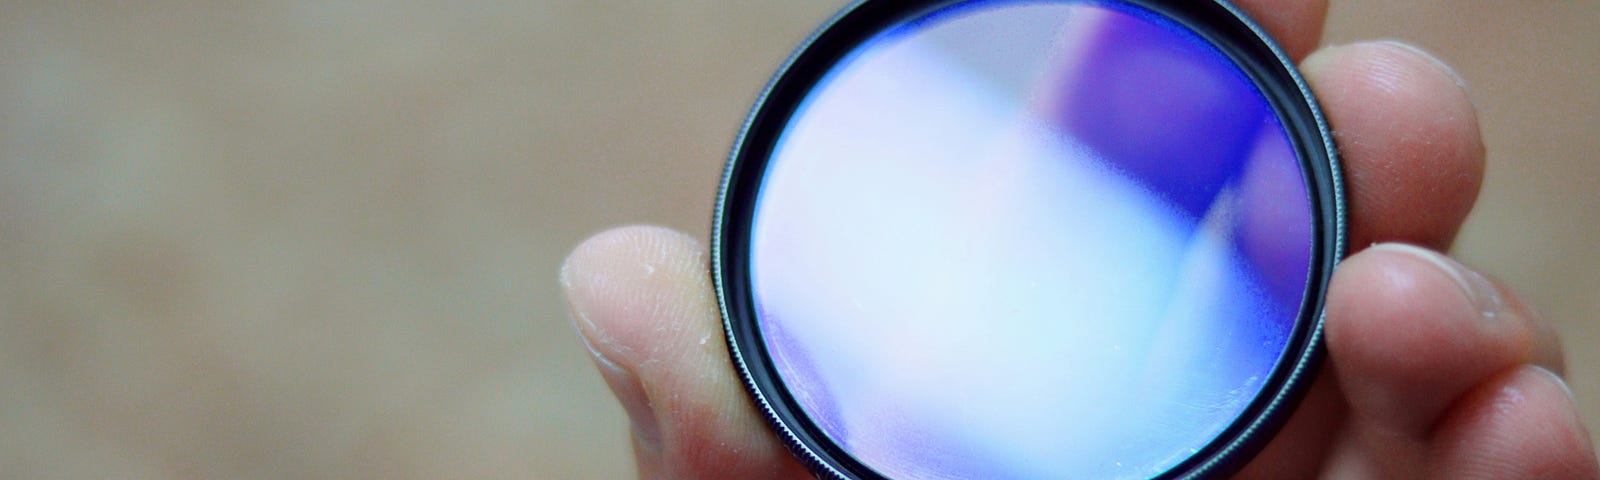 Holding a lens